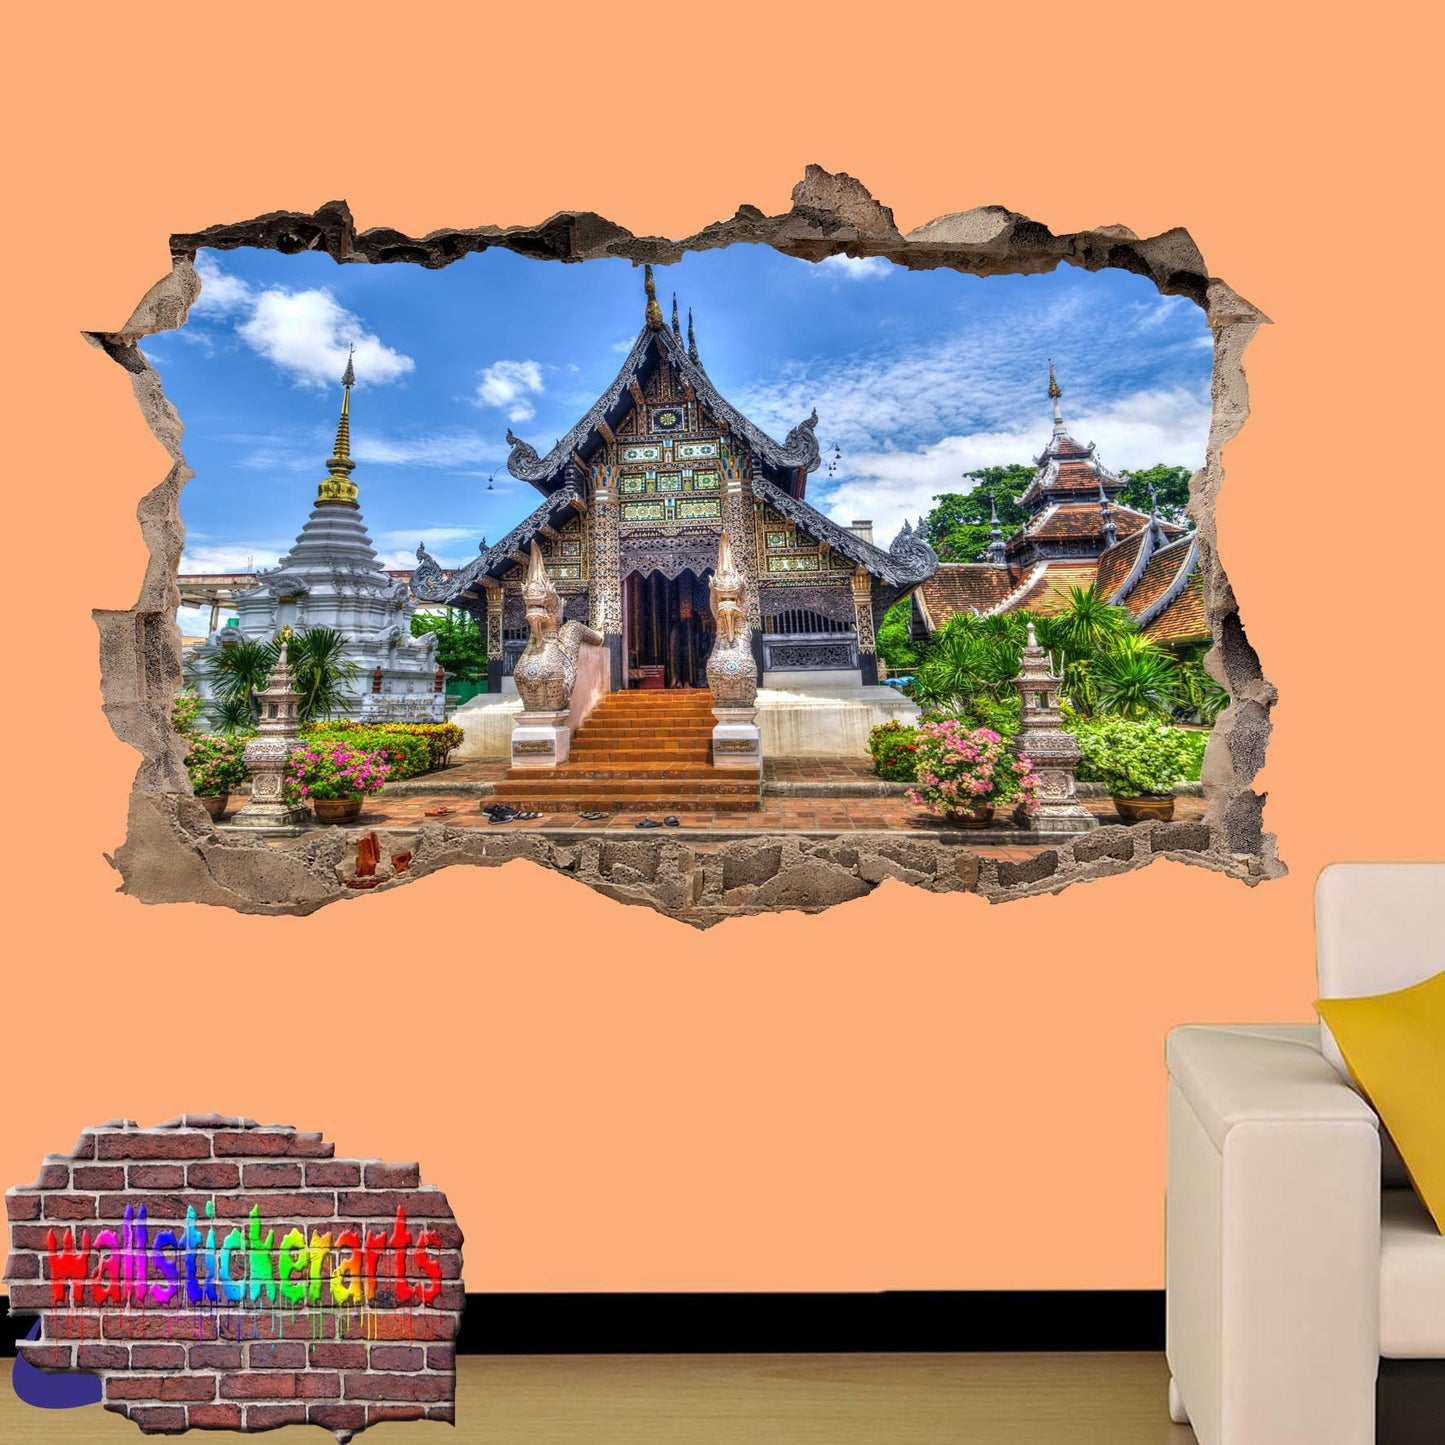 Buddhism Buddhist Temple 3d Art Smashed Effect Wall Sticker Room Office Nursery Shop Decoration Decal Mural YB2